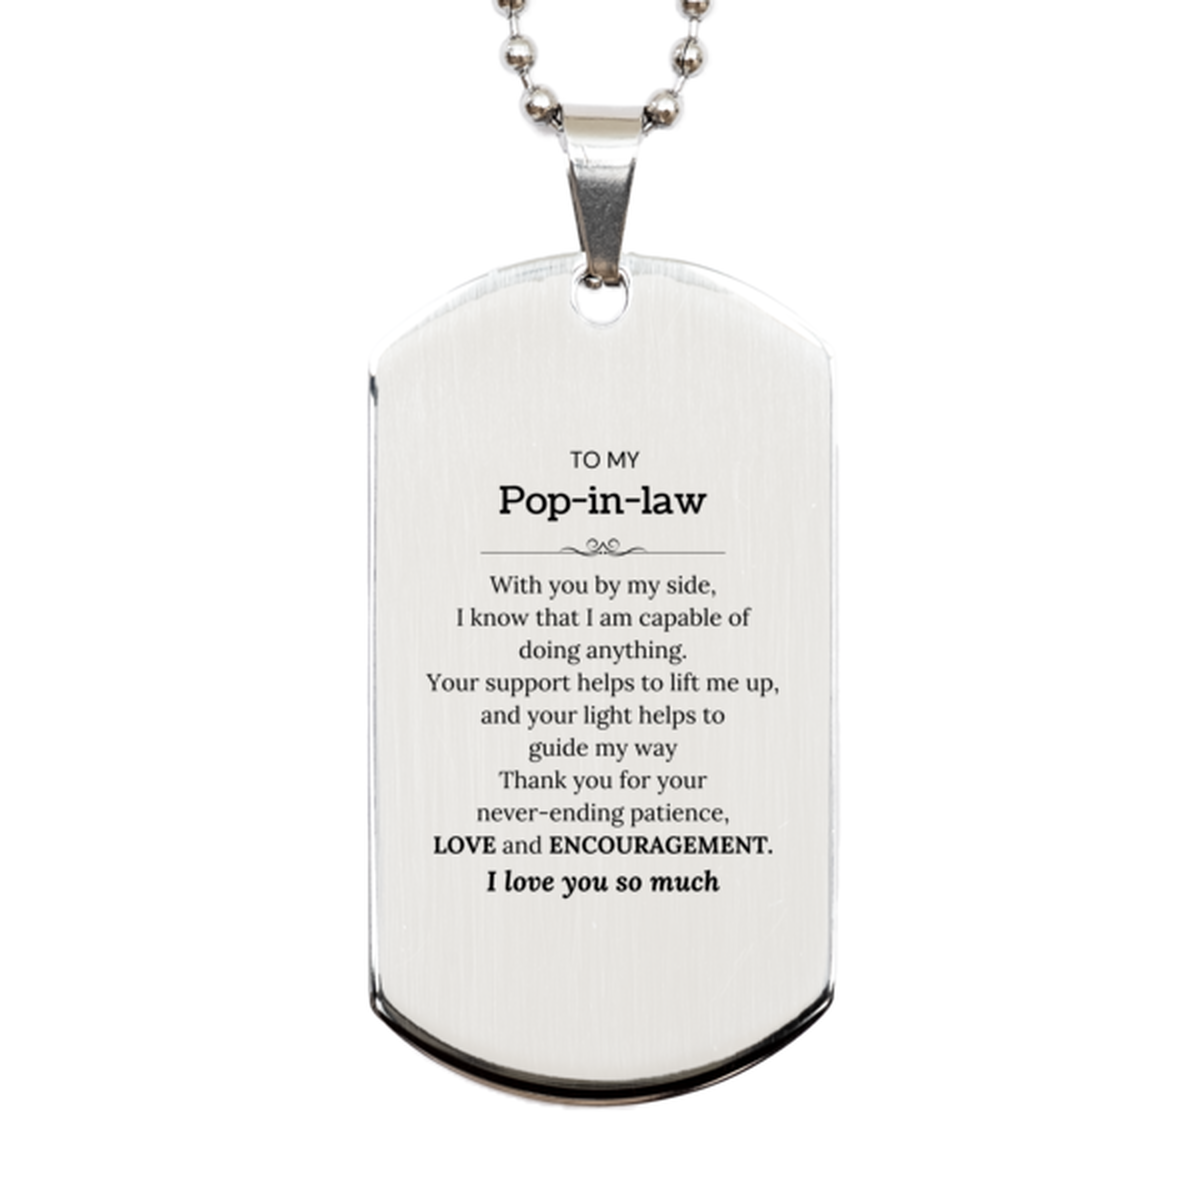 Appreciation Pop-in-law Silver Dog Tag Gifts, To My Pop-in-law Birthday Christmas Wedding Keepsake Gifts for Pop-in-law With you by my side, I know that I am capable of doing anything. I love you so much